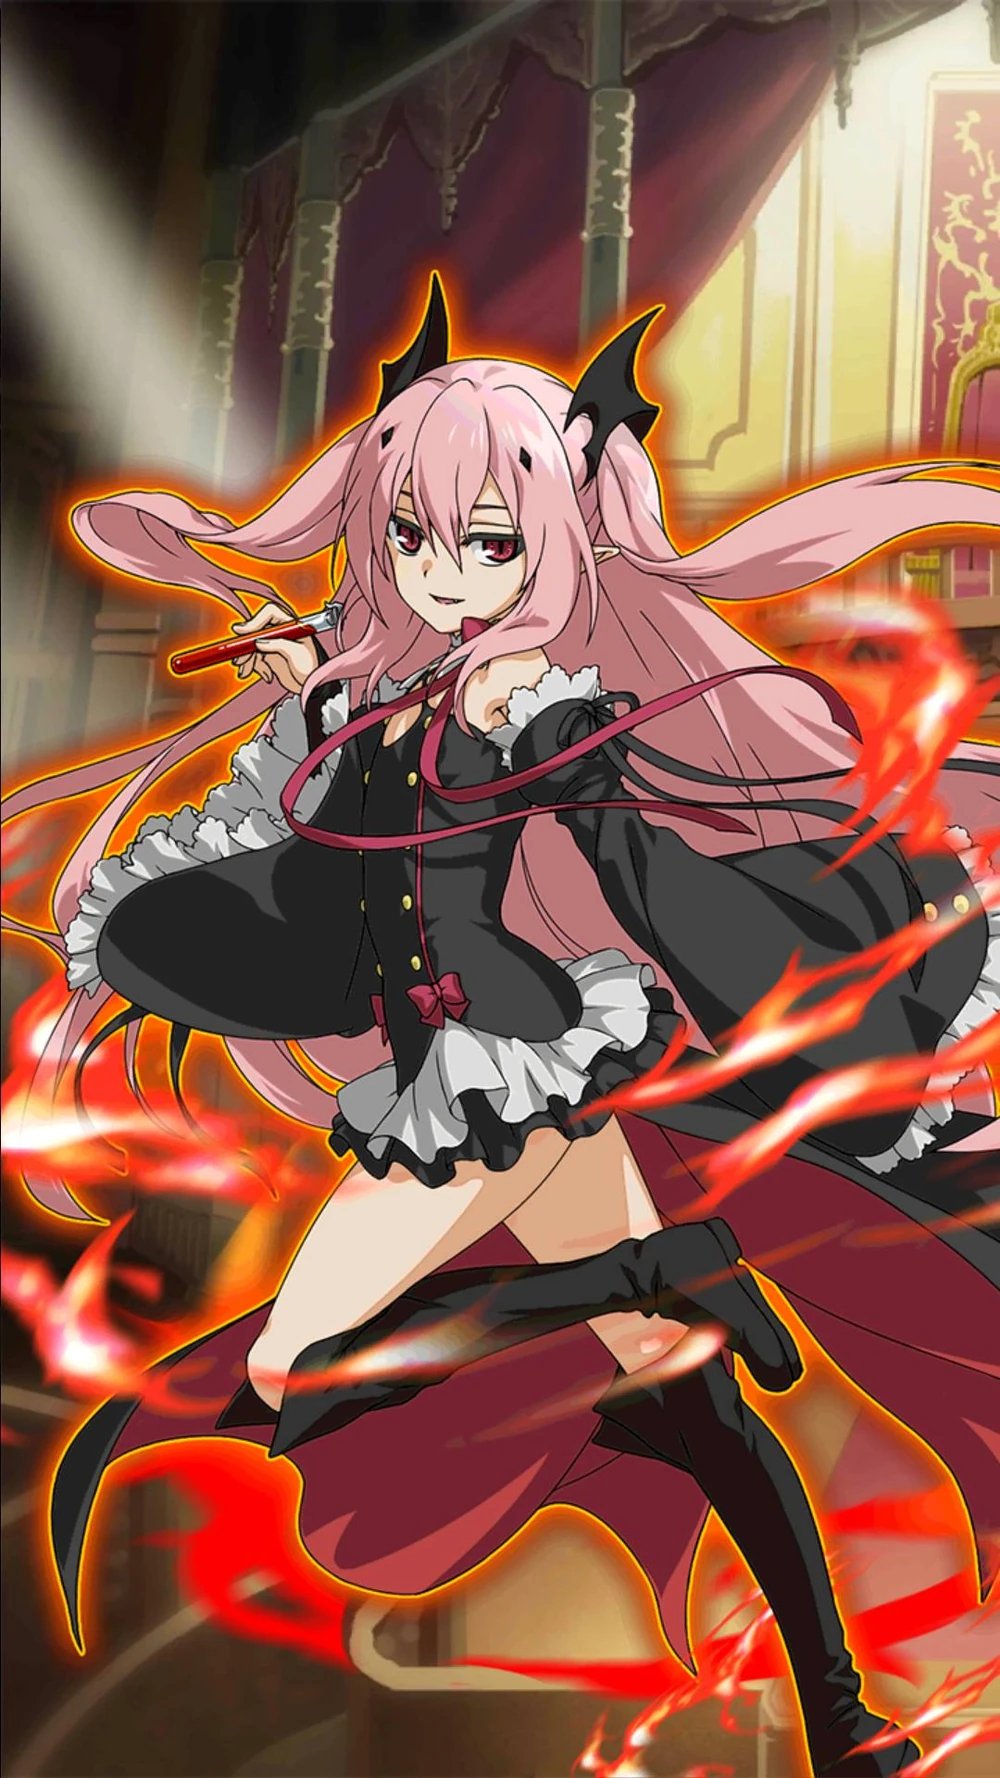 Japanese Anime Seraph of the end Lolita Krul Tepes Costume Suit Cosplay |  eBay